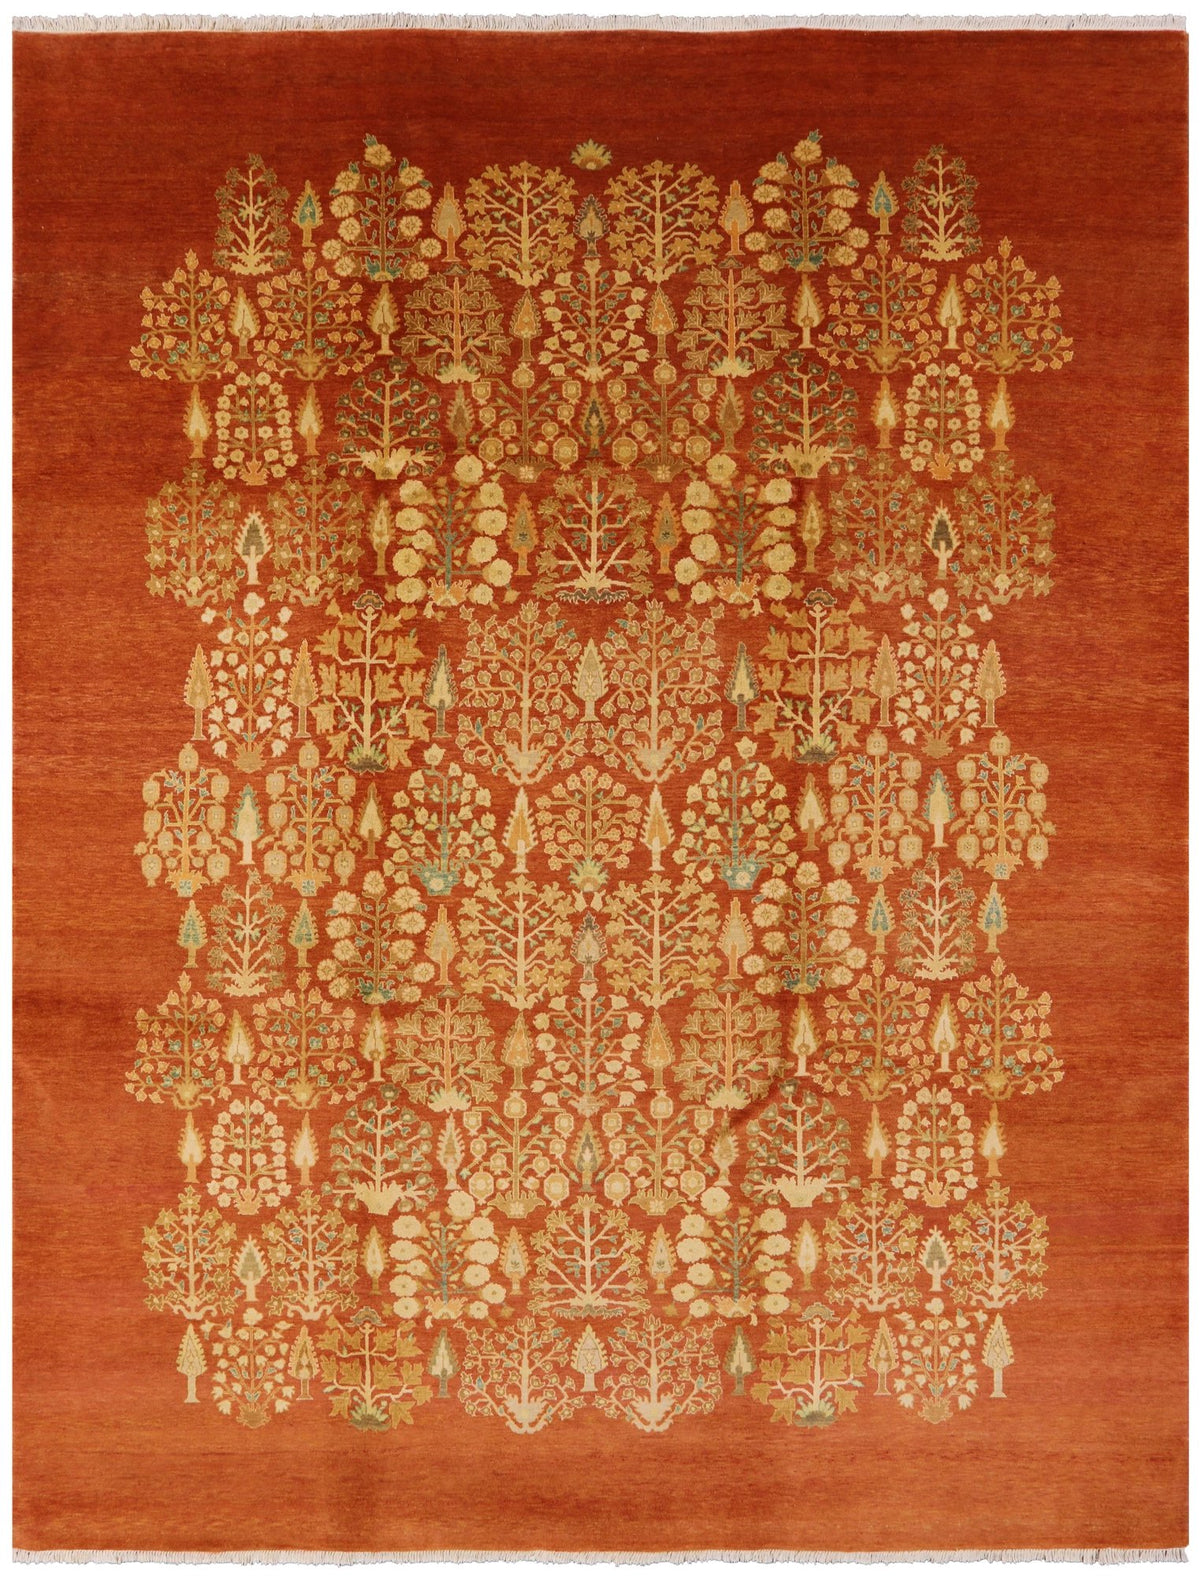 https://www.goldennile.shop/wp-content/uploads/1690/41/ziegler-hand-knotted-area-rug-9-1-x-11-9-golden-nile-find-the-top-choice-online_0.jpg